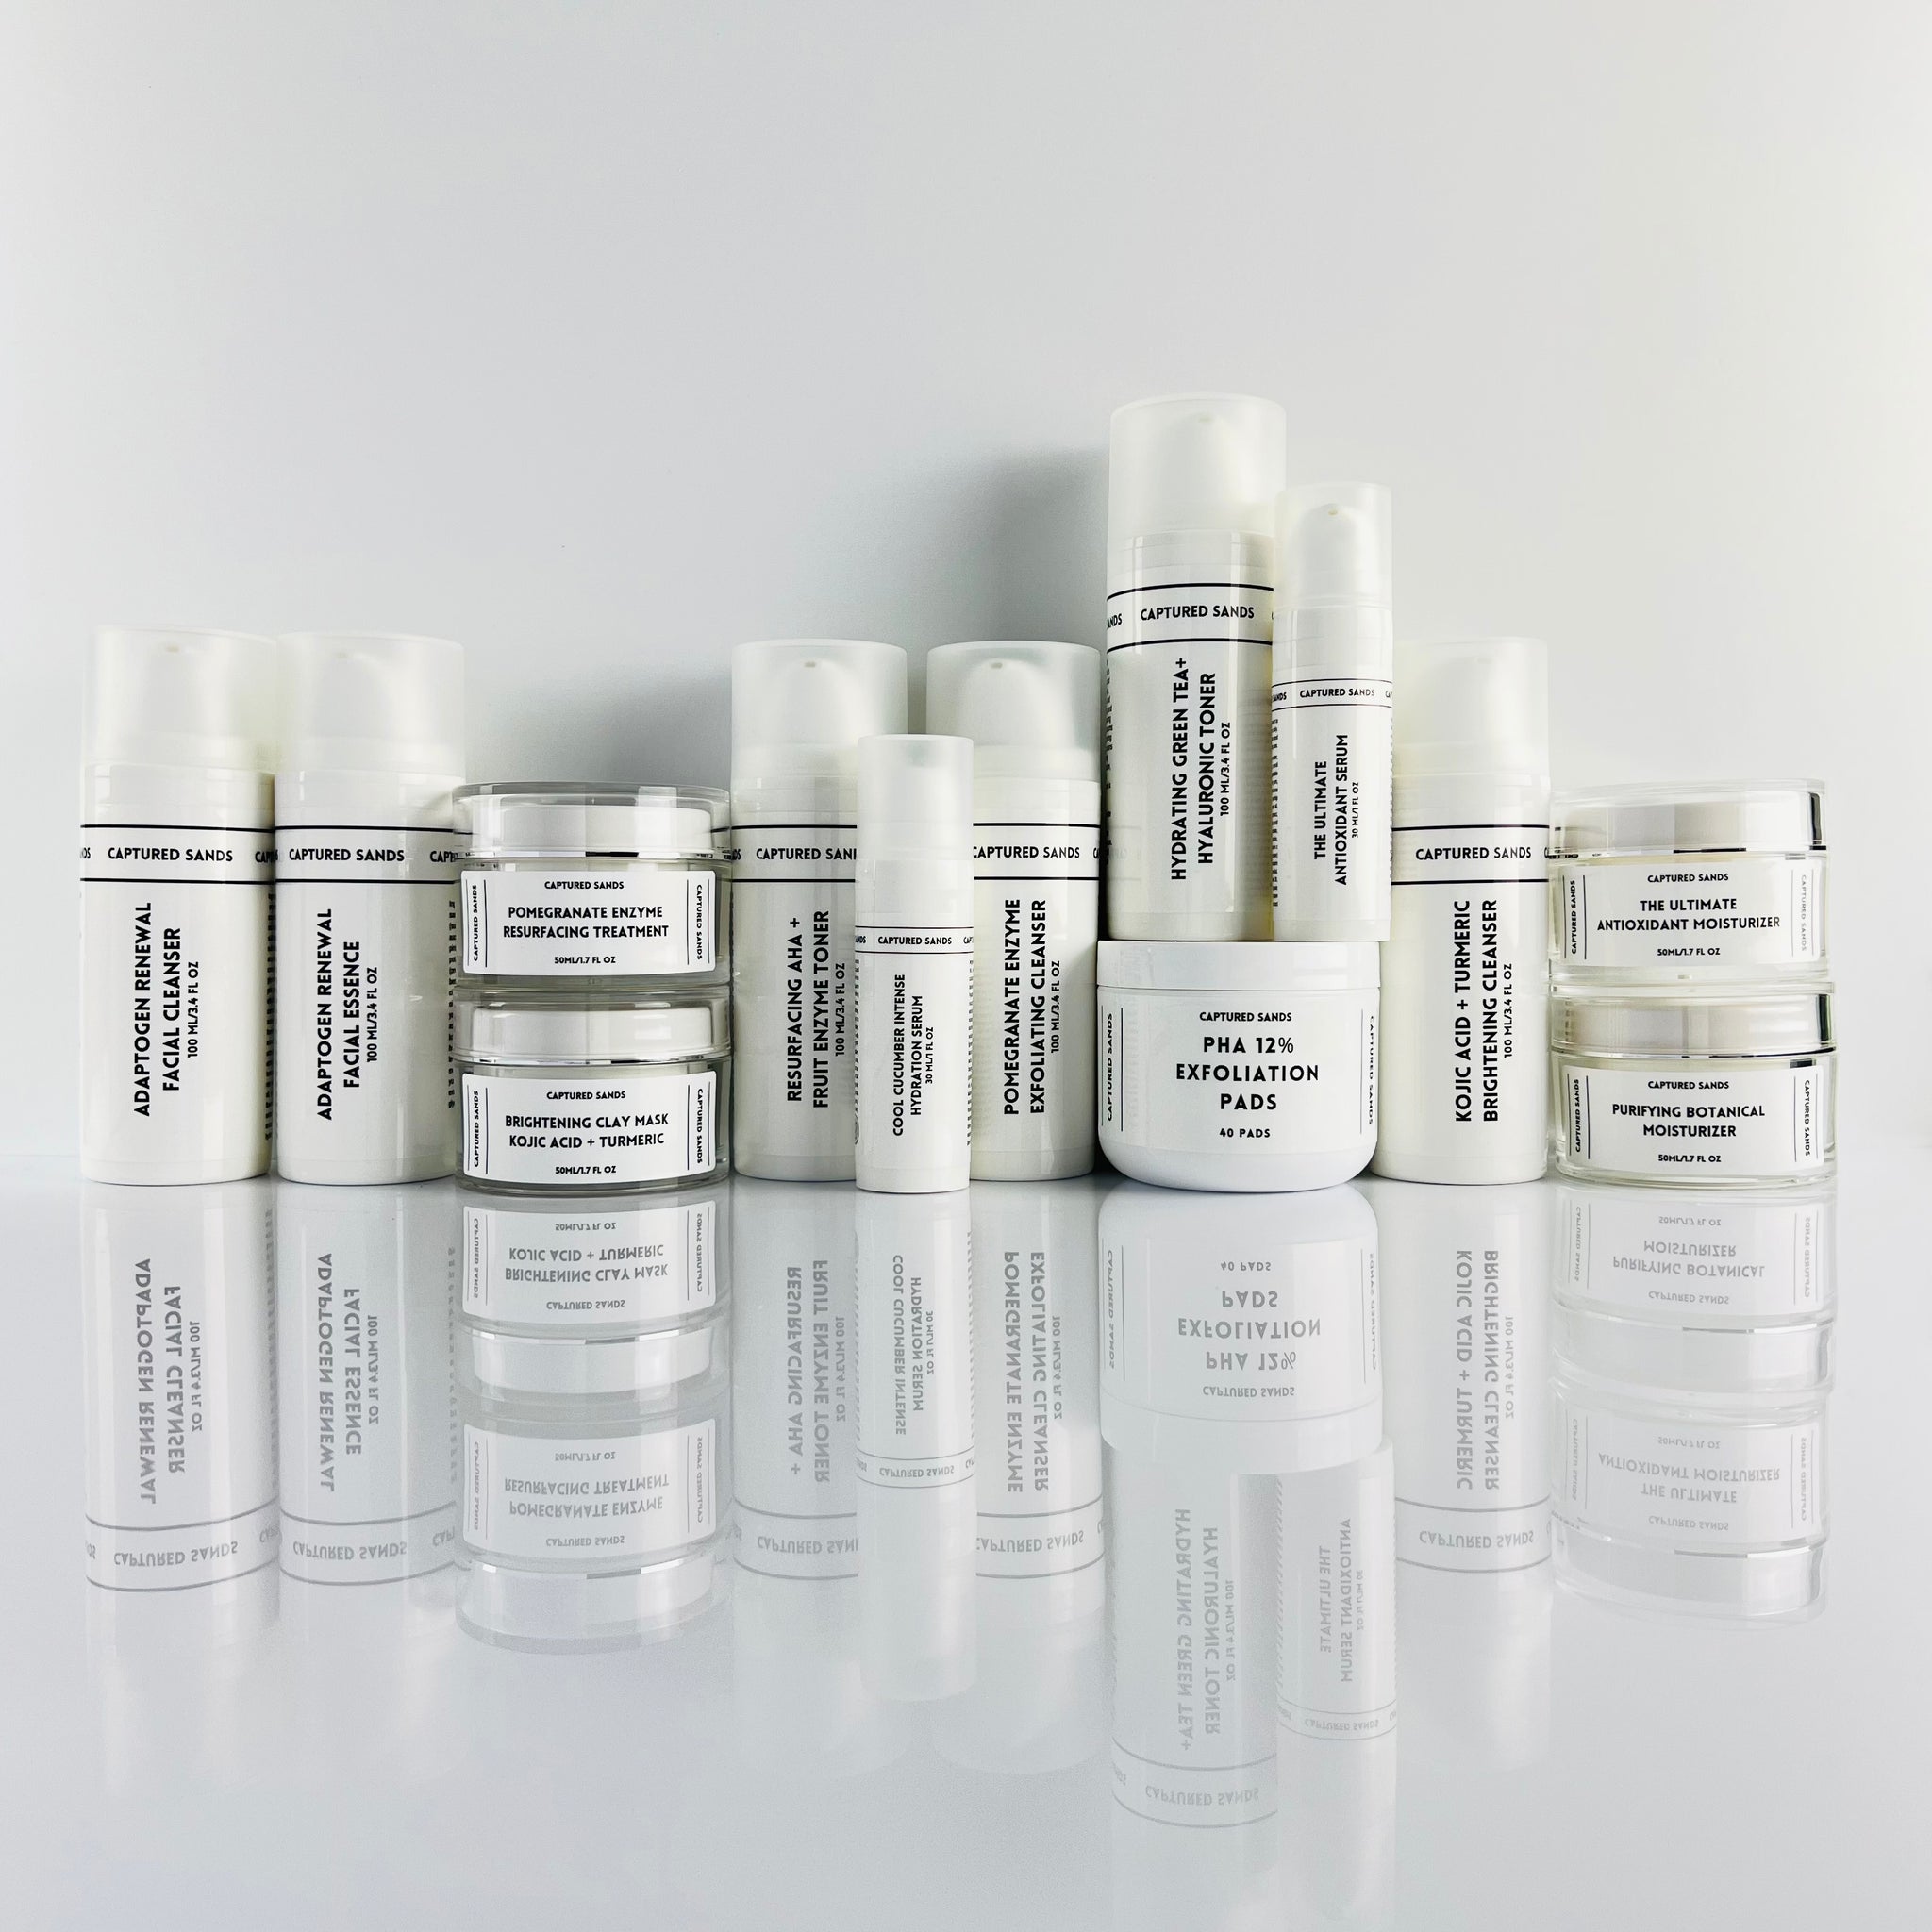 our skincare ingredients and products are as gentle as they are effective